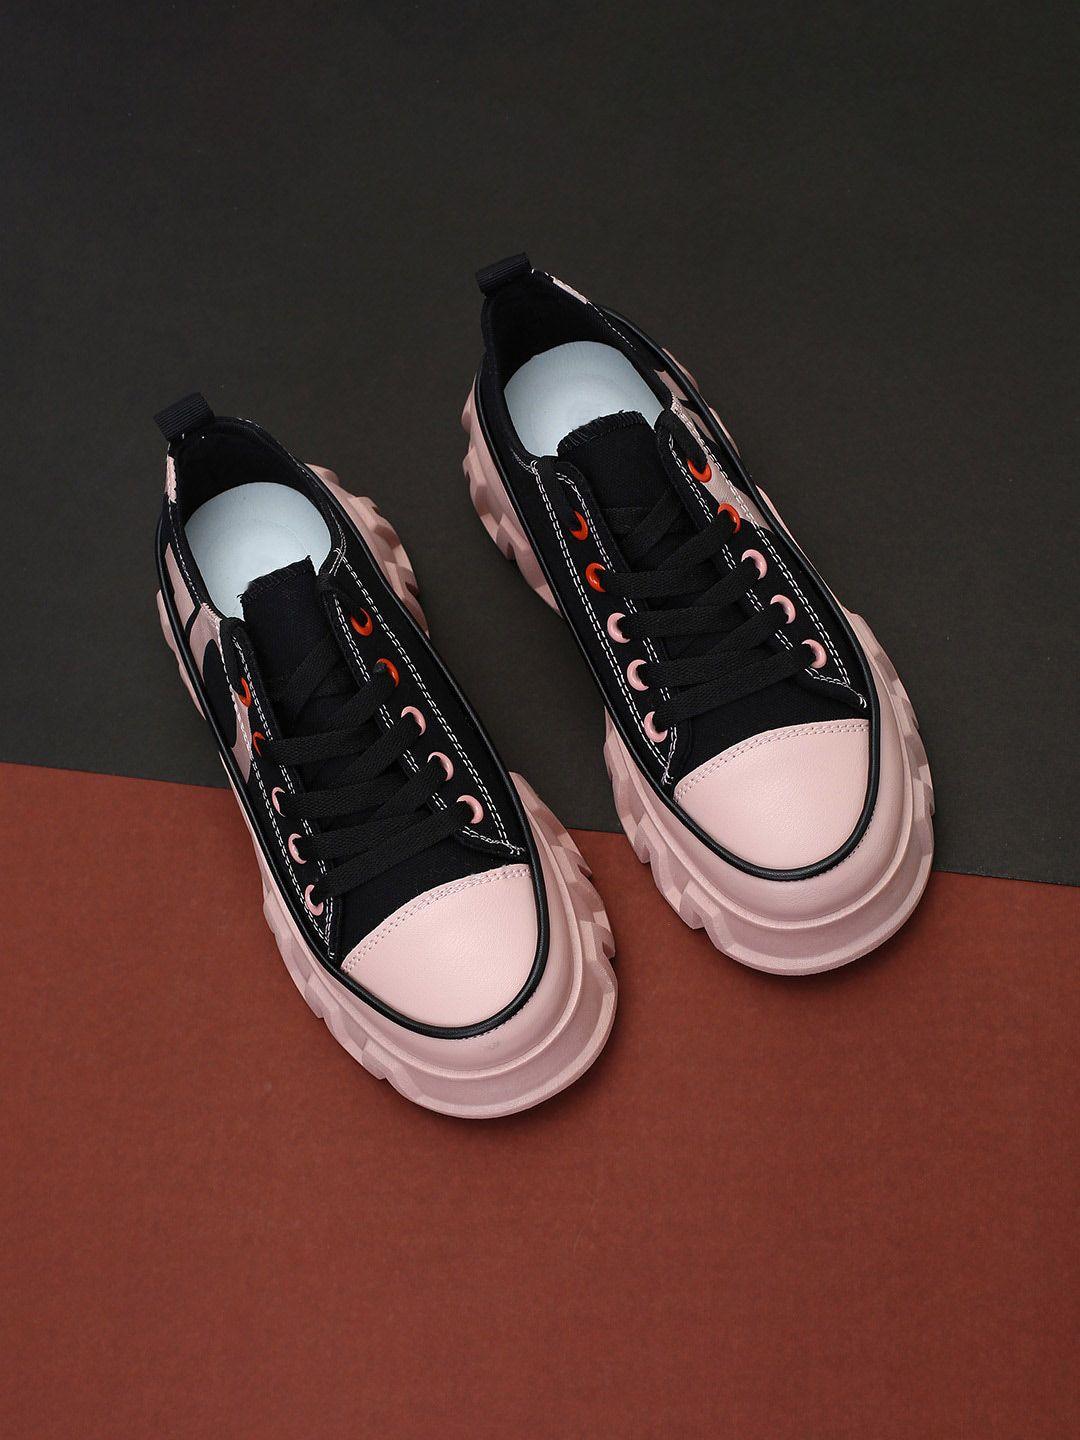 ginger by lifestyle women colourblocked sneakers